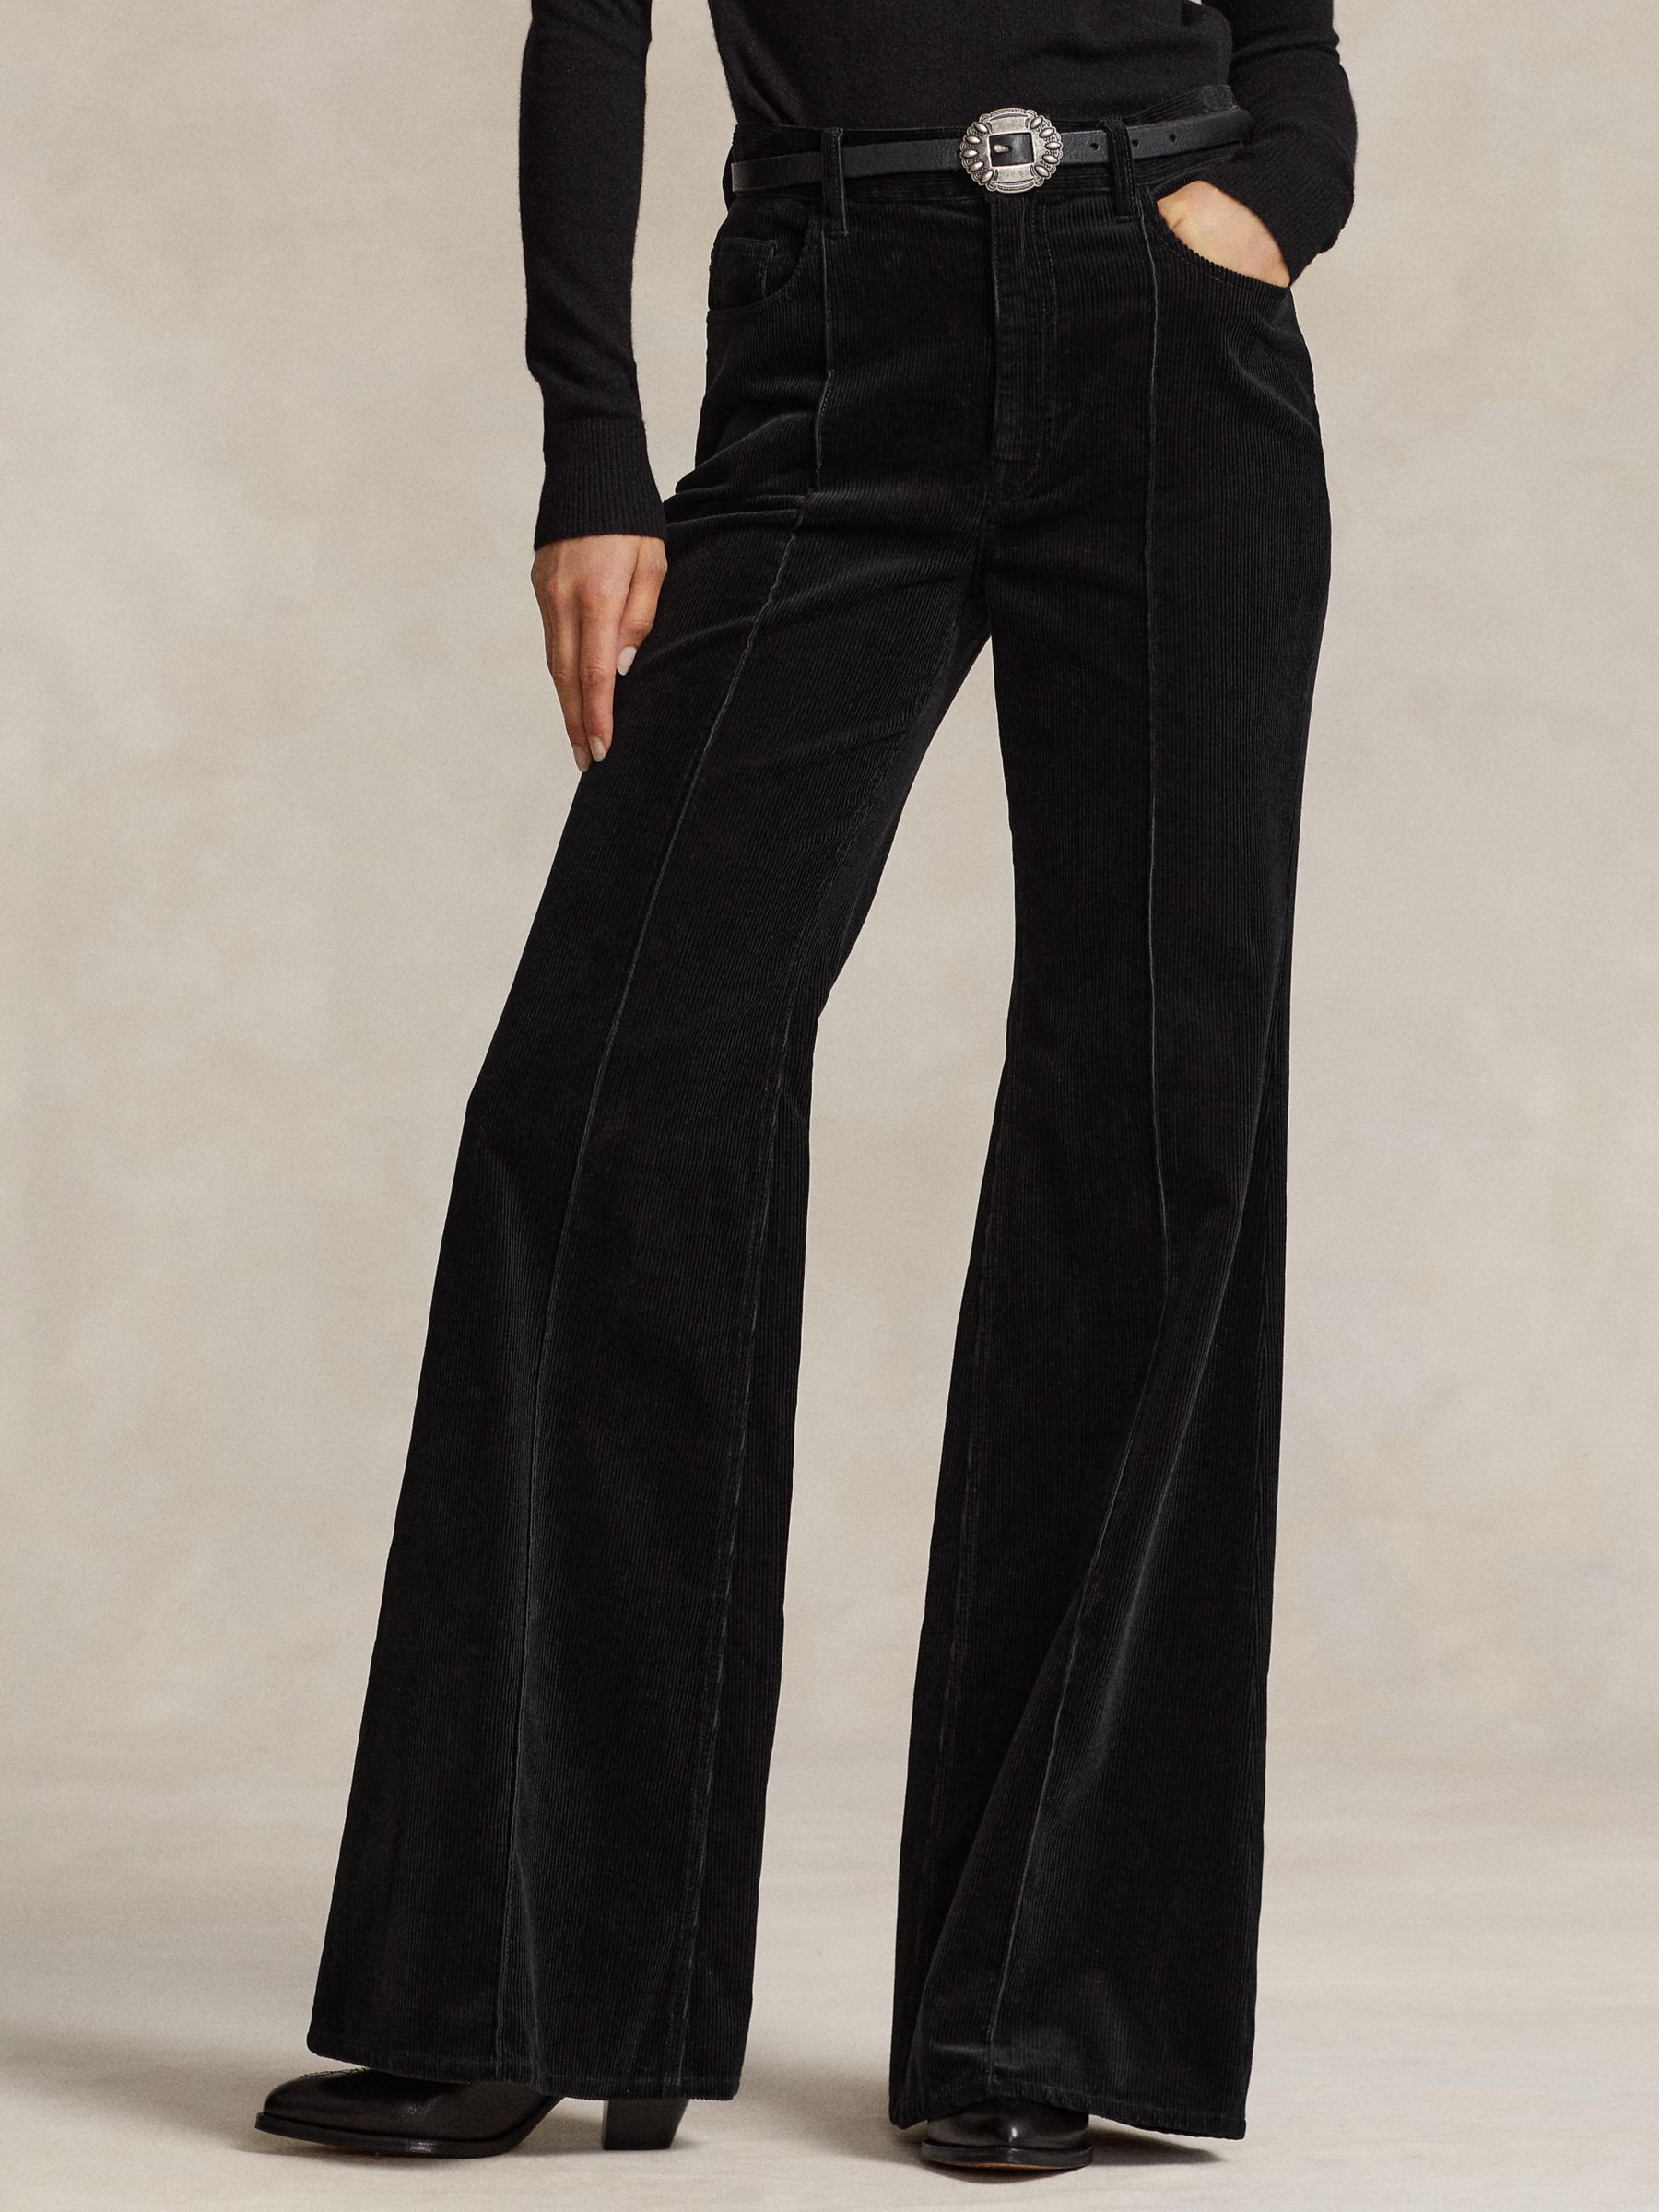 Polo Ralph Lauren Pintucked Corduroy Flare Flat Front Trousers, Black, 8